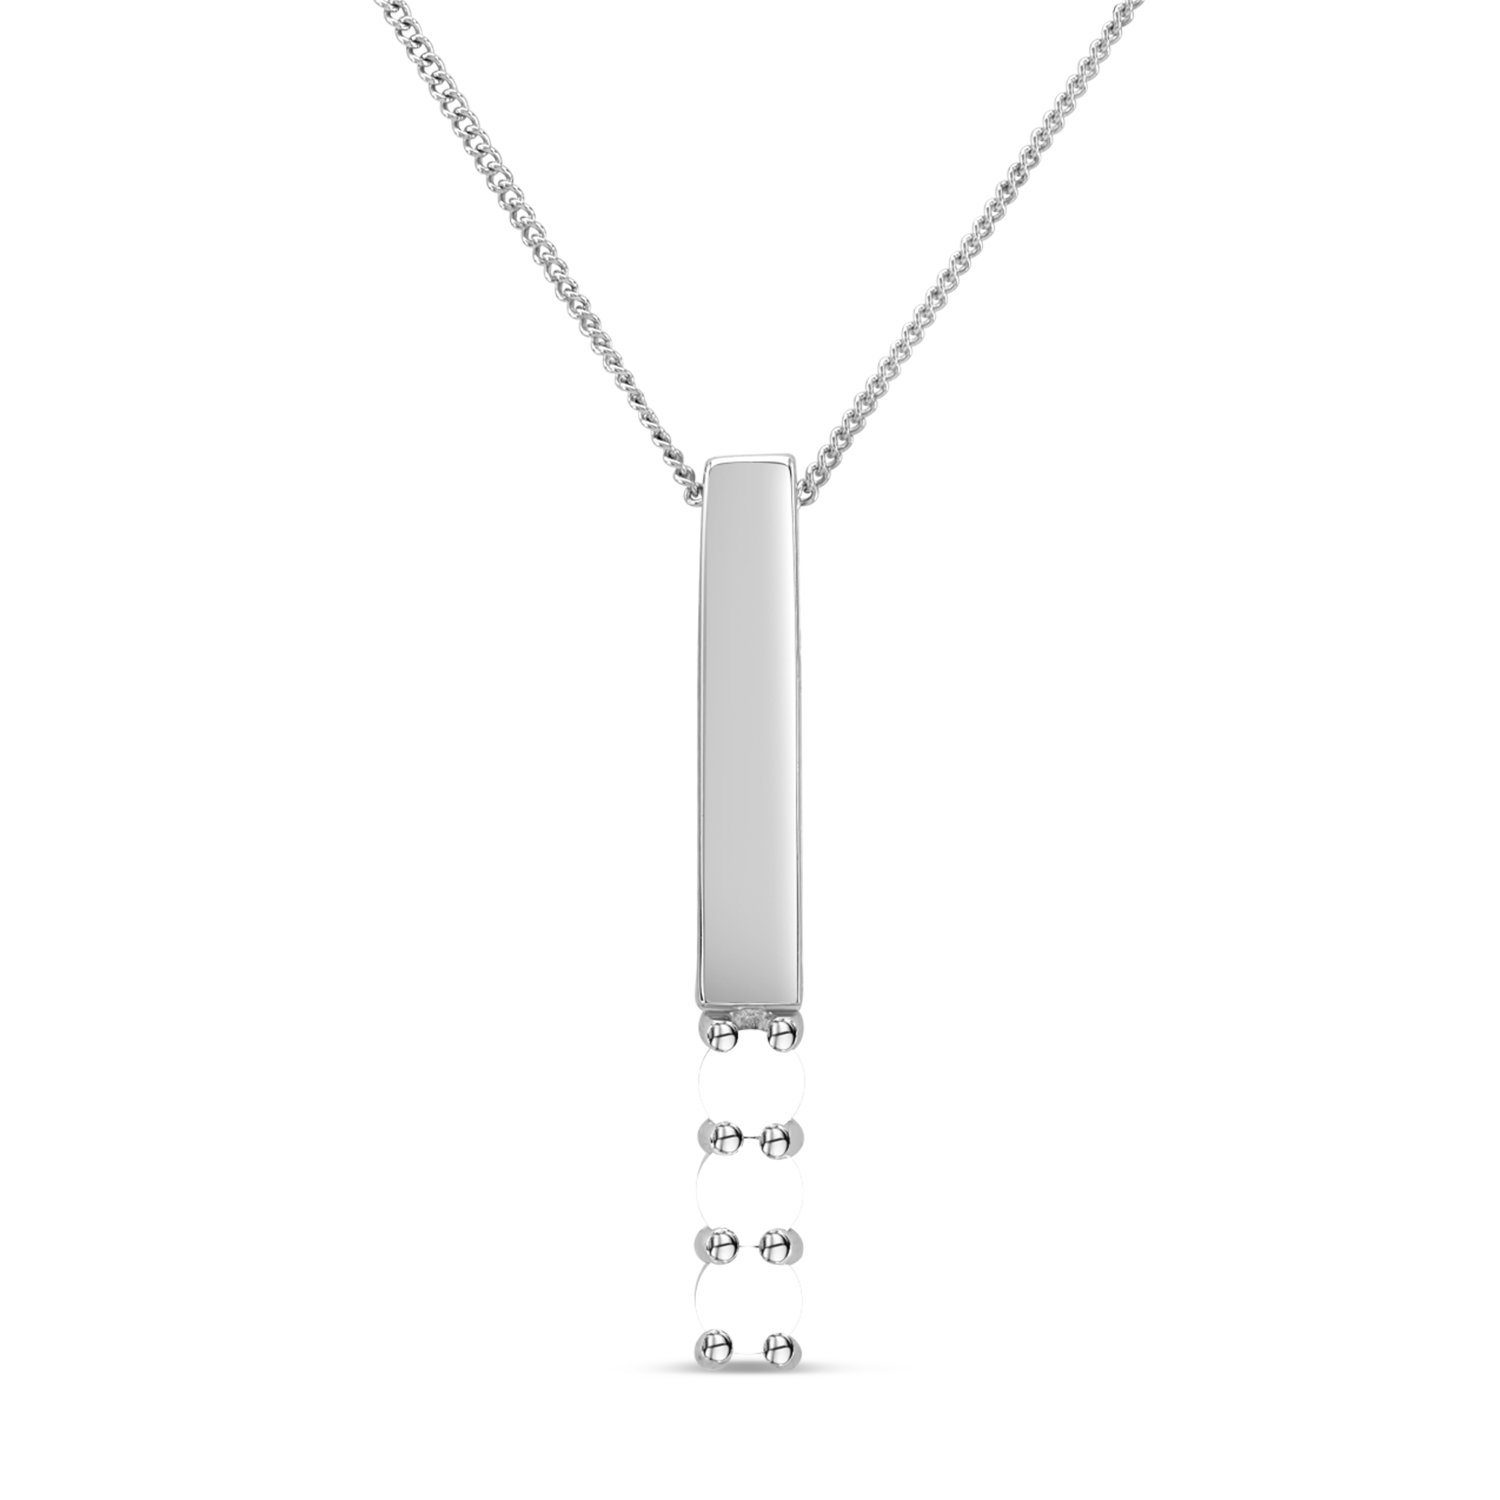 Personalized Skinny Bar Birthstone Necklace - 3 Stones | Tiny Tags